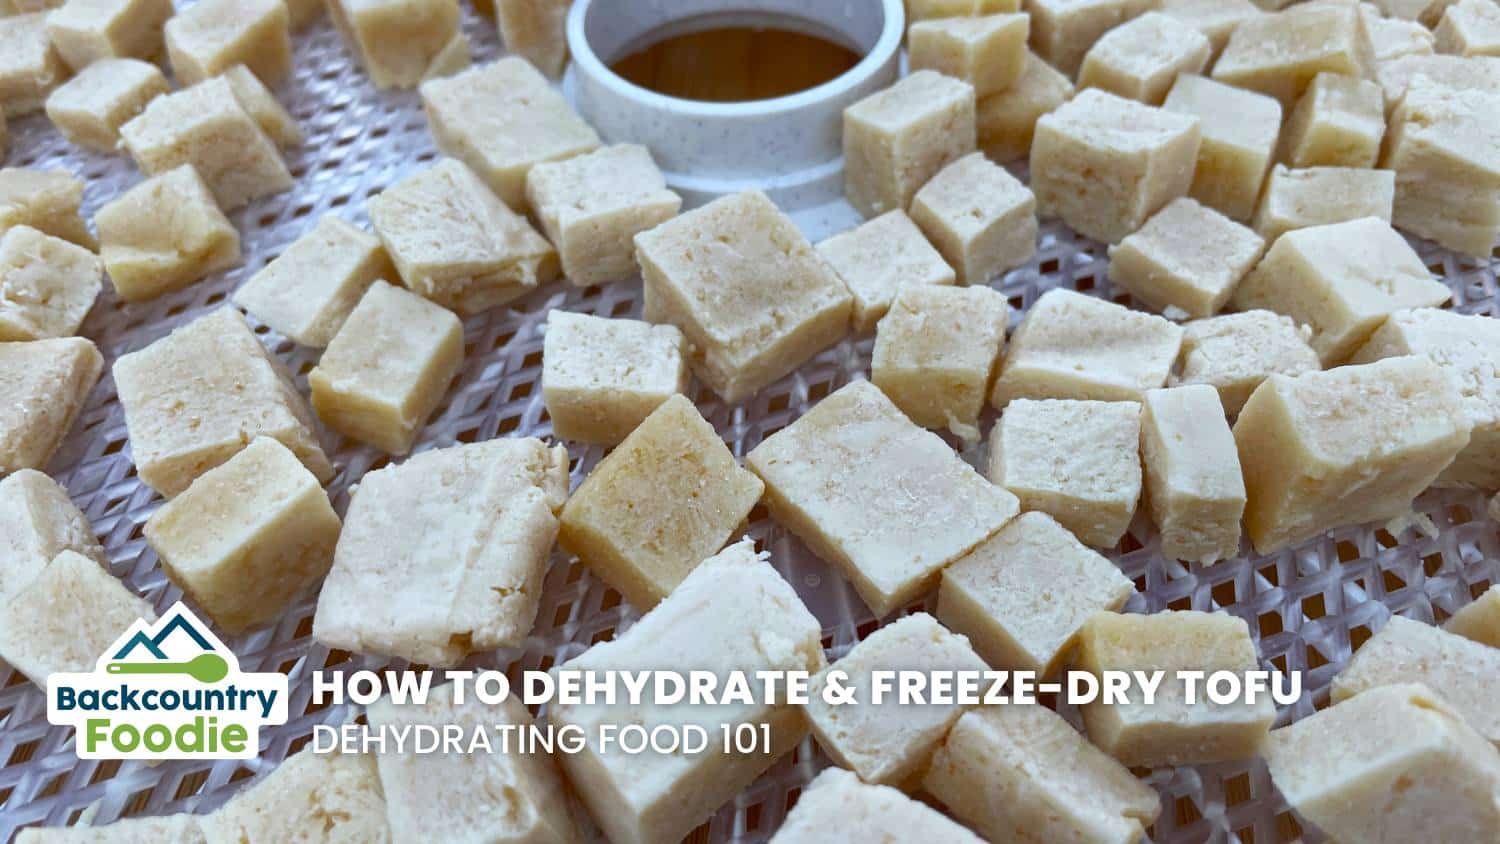 Backcountry Foodie How to Dehydrate Tofu for Backpacking Meals Dehydrating Food 101 blog